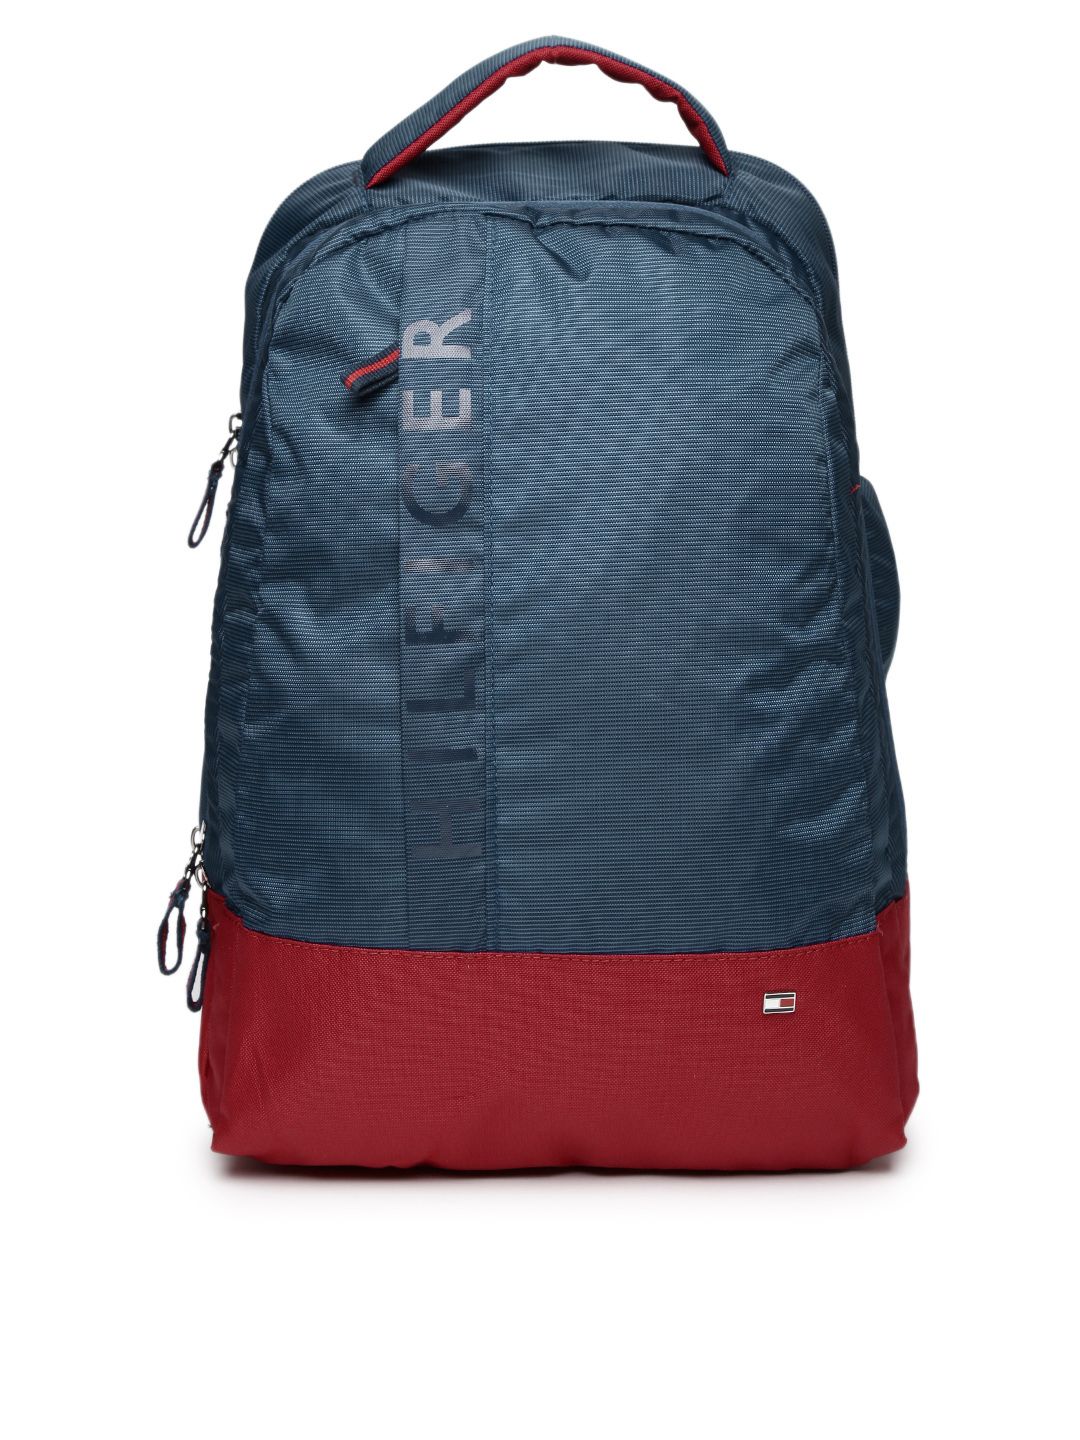 Tommy Hilfiger Unisex Navy & Red Biker Club-Basil Backpack Price in India